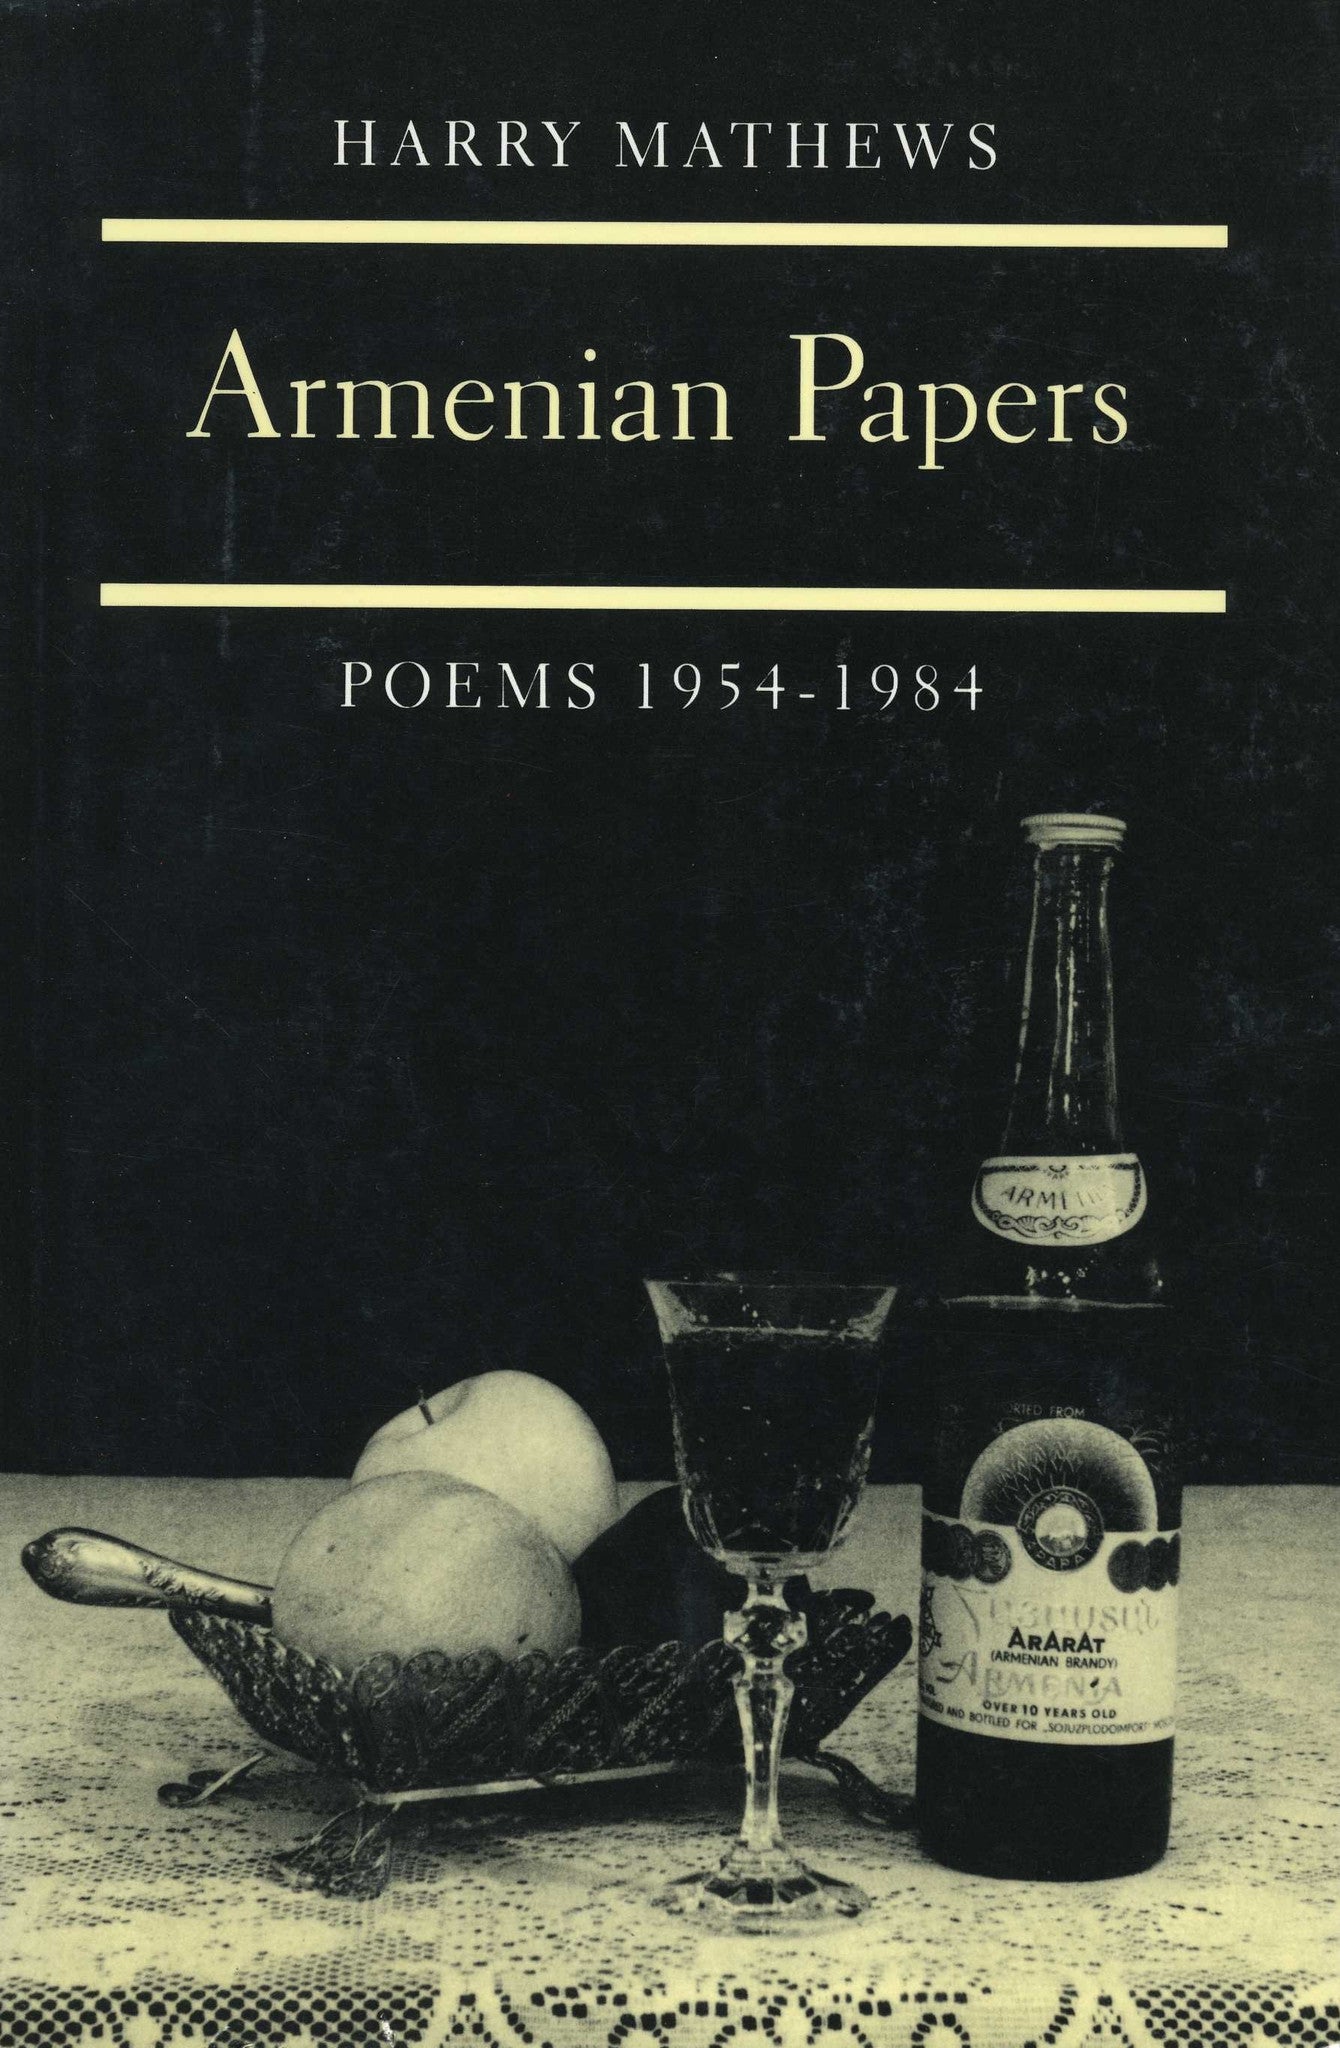 ARMENIAN PAPERS: Poems 1954-1984